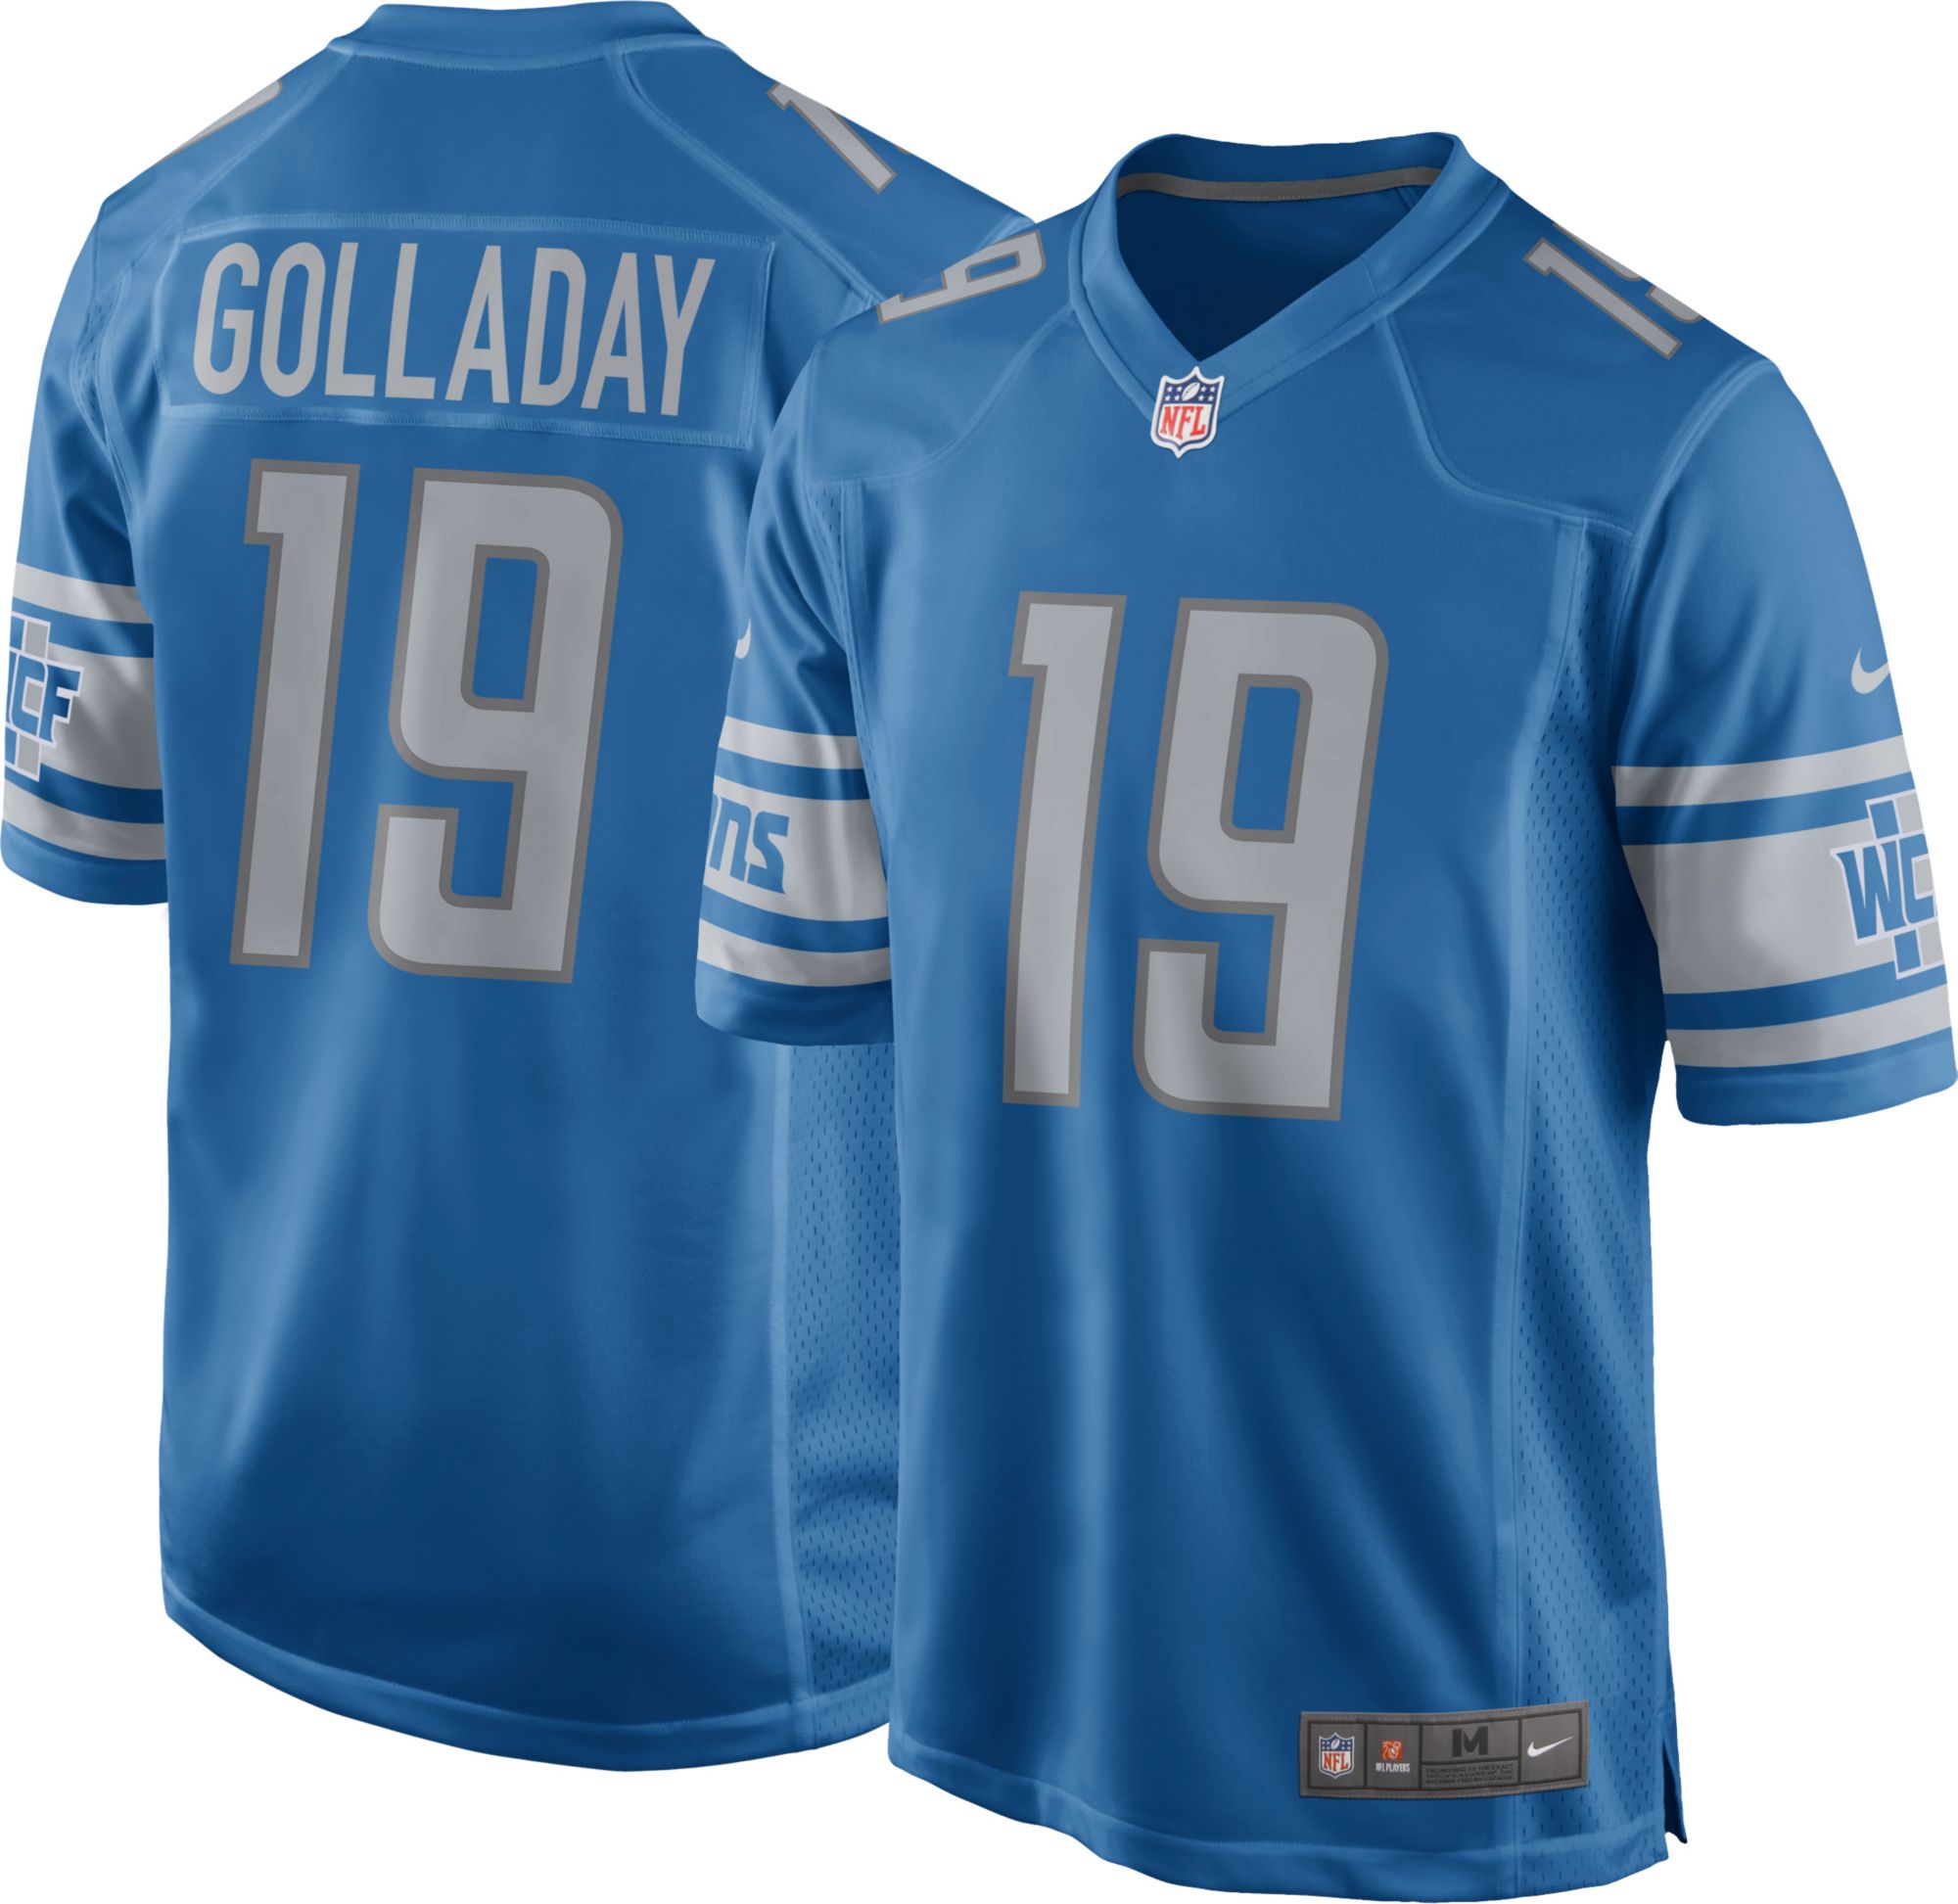 kenny golladay jersey youth